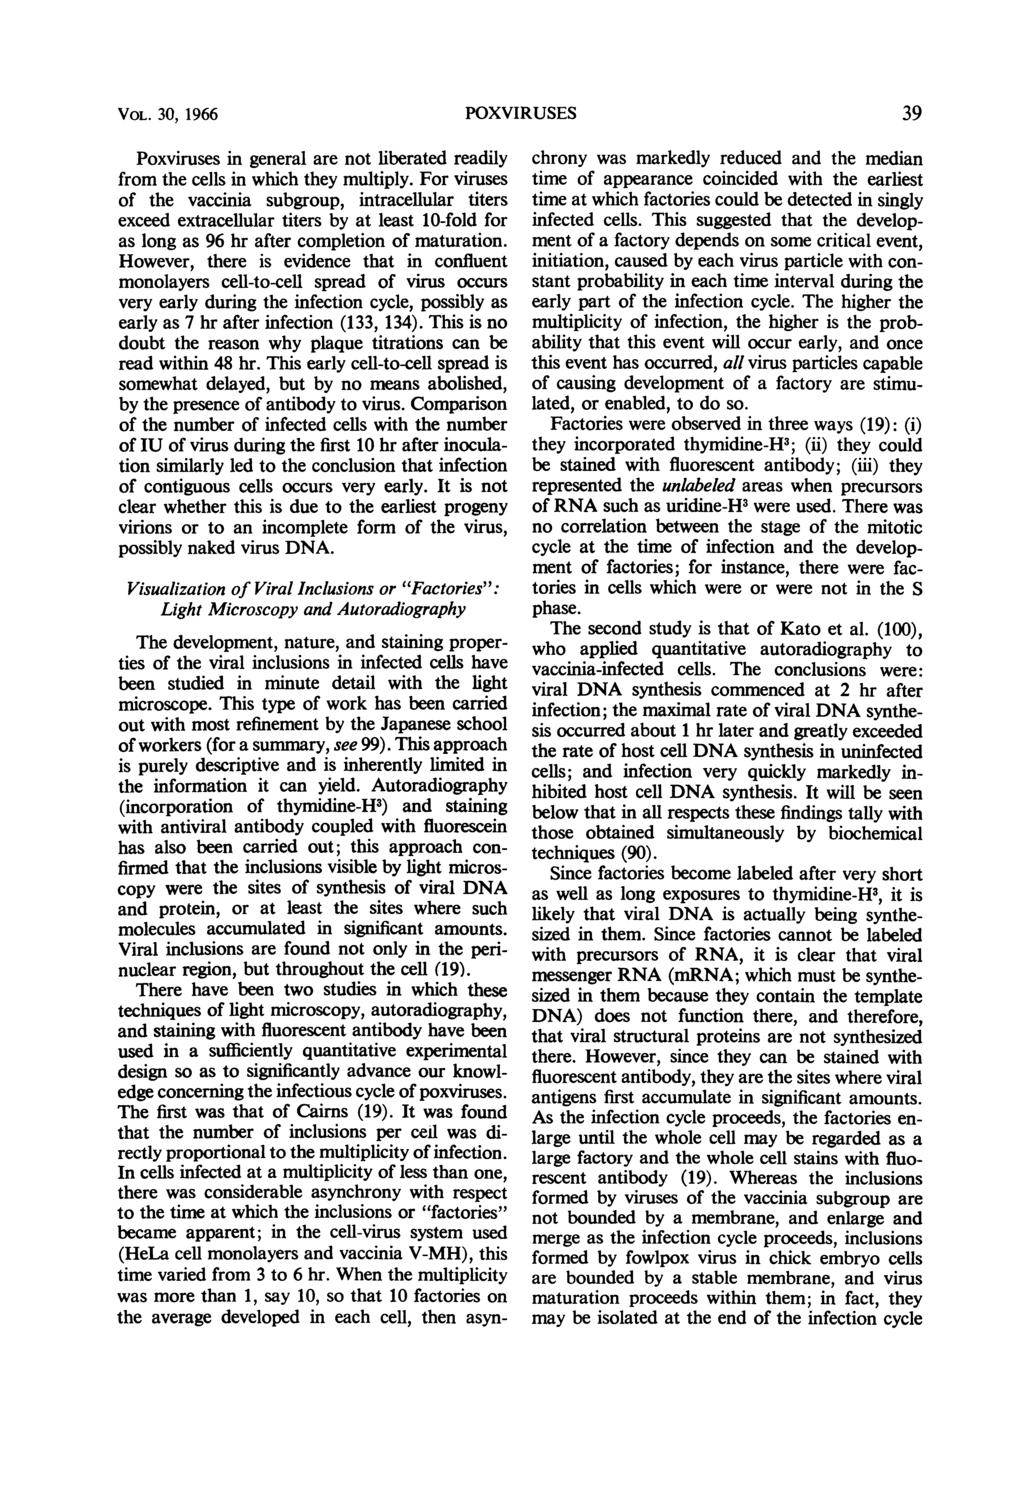 VOL. 30, 1966 Poxviruses in general are not liberated readily from the cells in which they multiply.